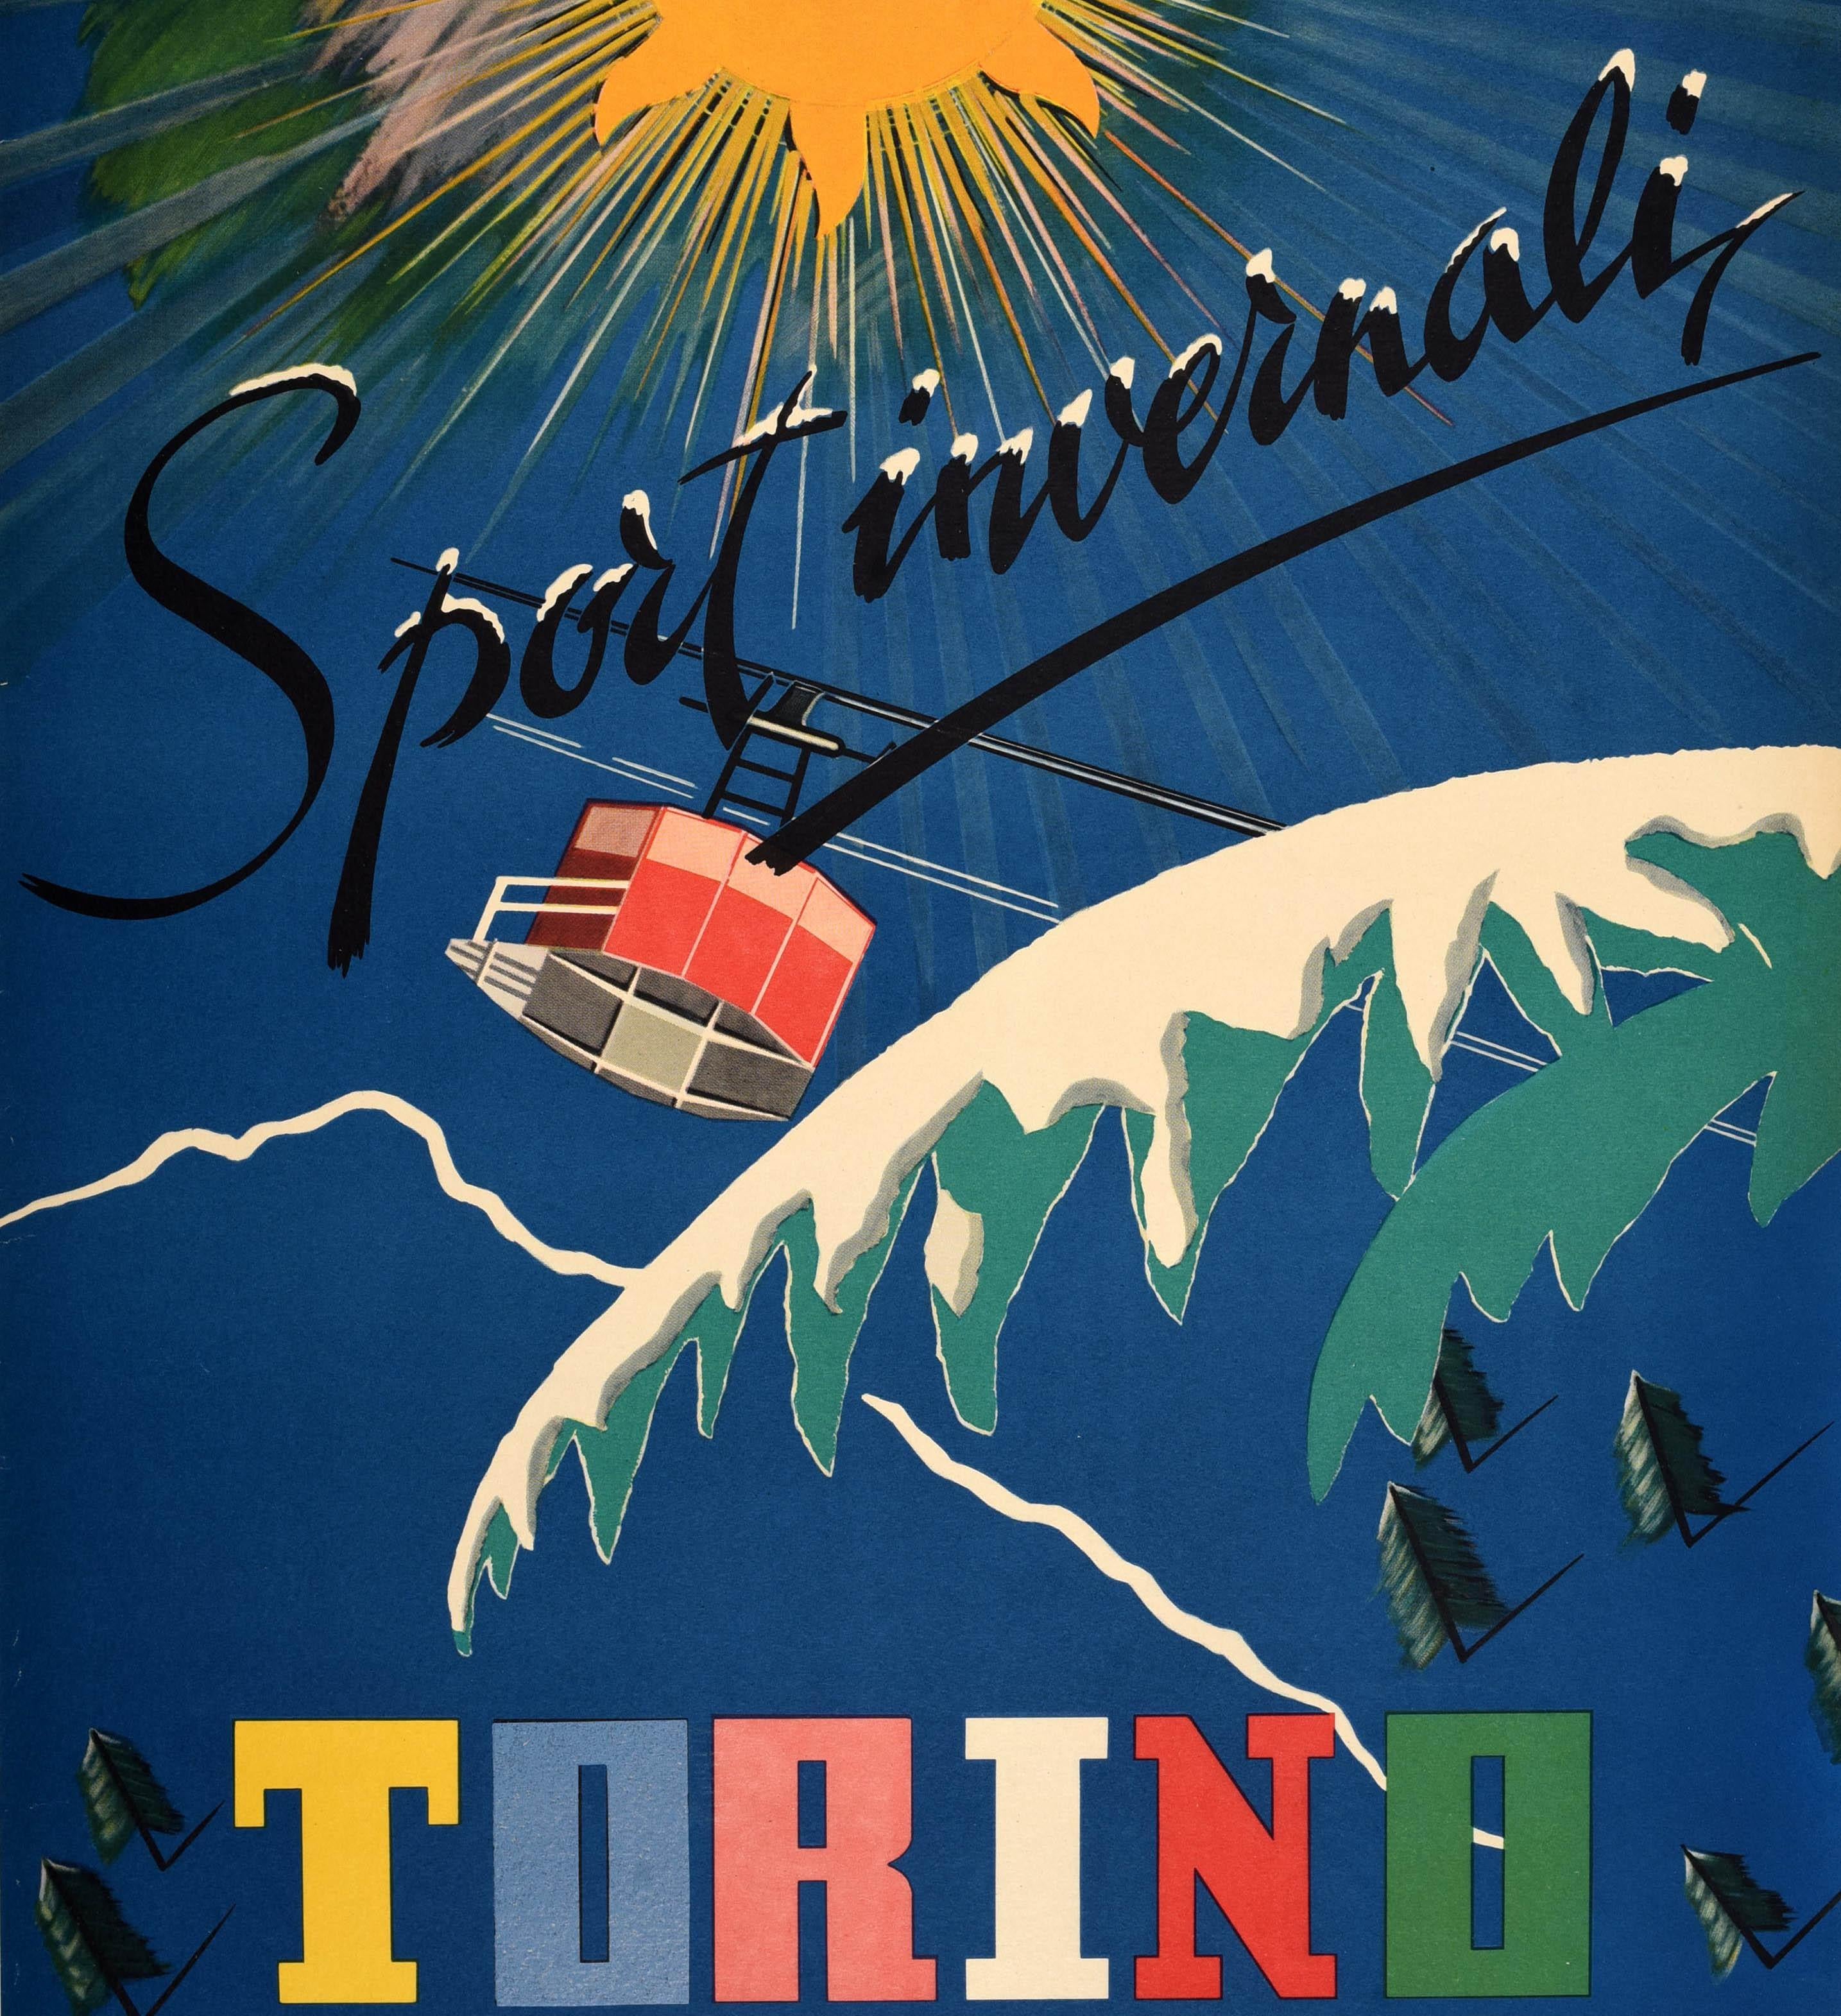 Original vintage travel poster promoting Winter Sports in Torino Capital of the Alps / Sport Invernali Torino Capitale Delle Alpi - featuring artwork by Alberto Campagnoli (1905-1983) of a red cable car ski lift traveling up past snow covered trees